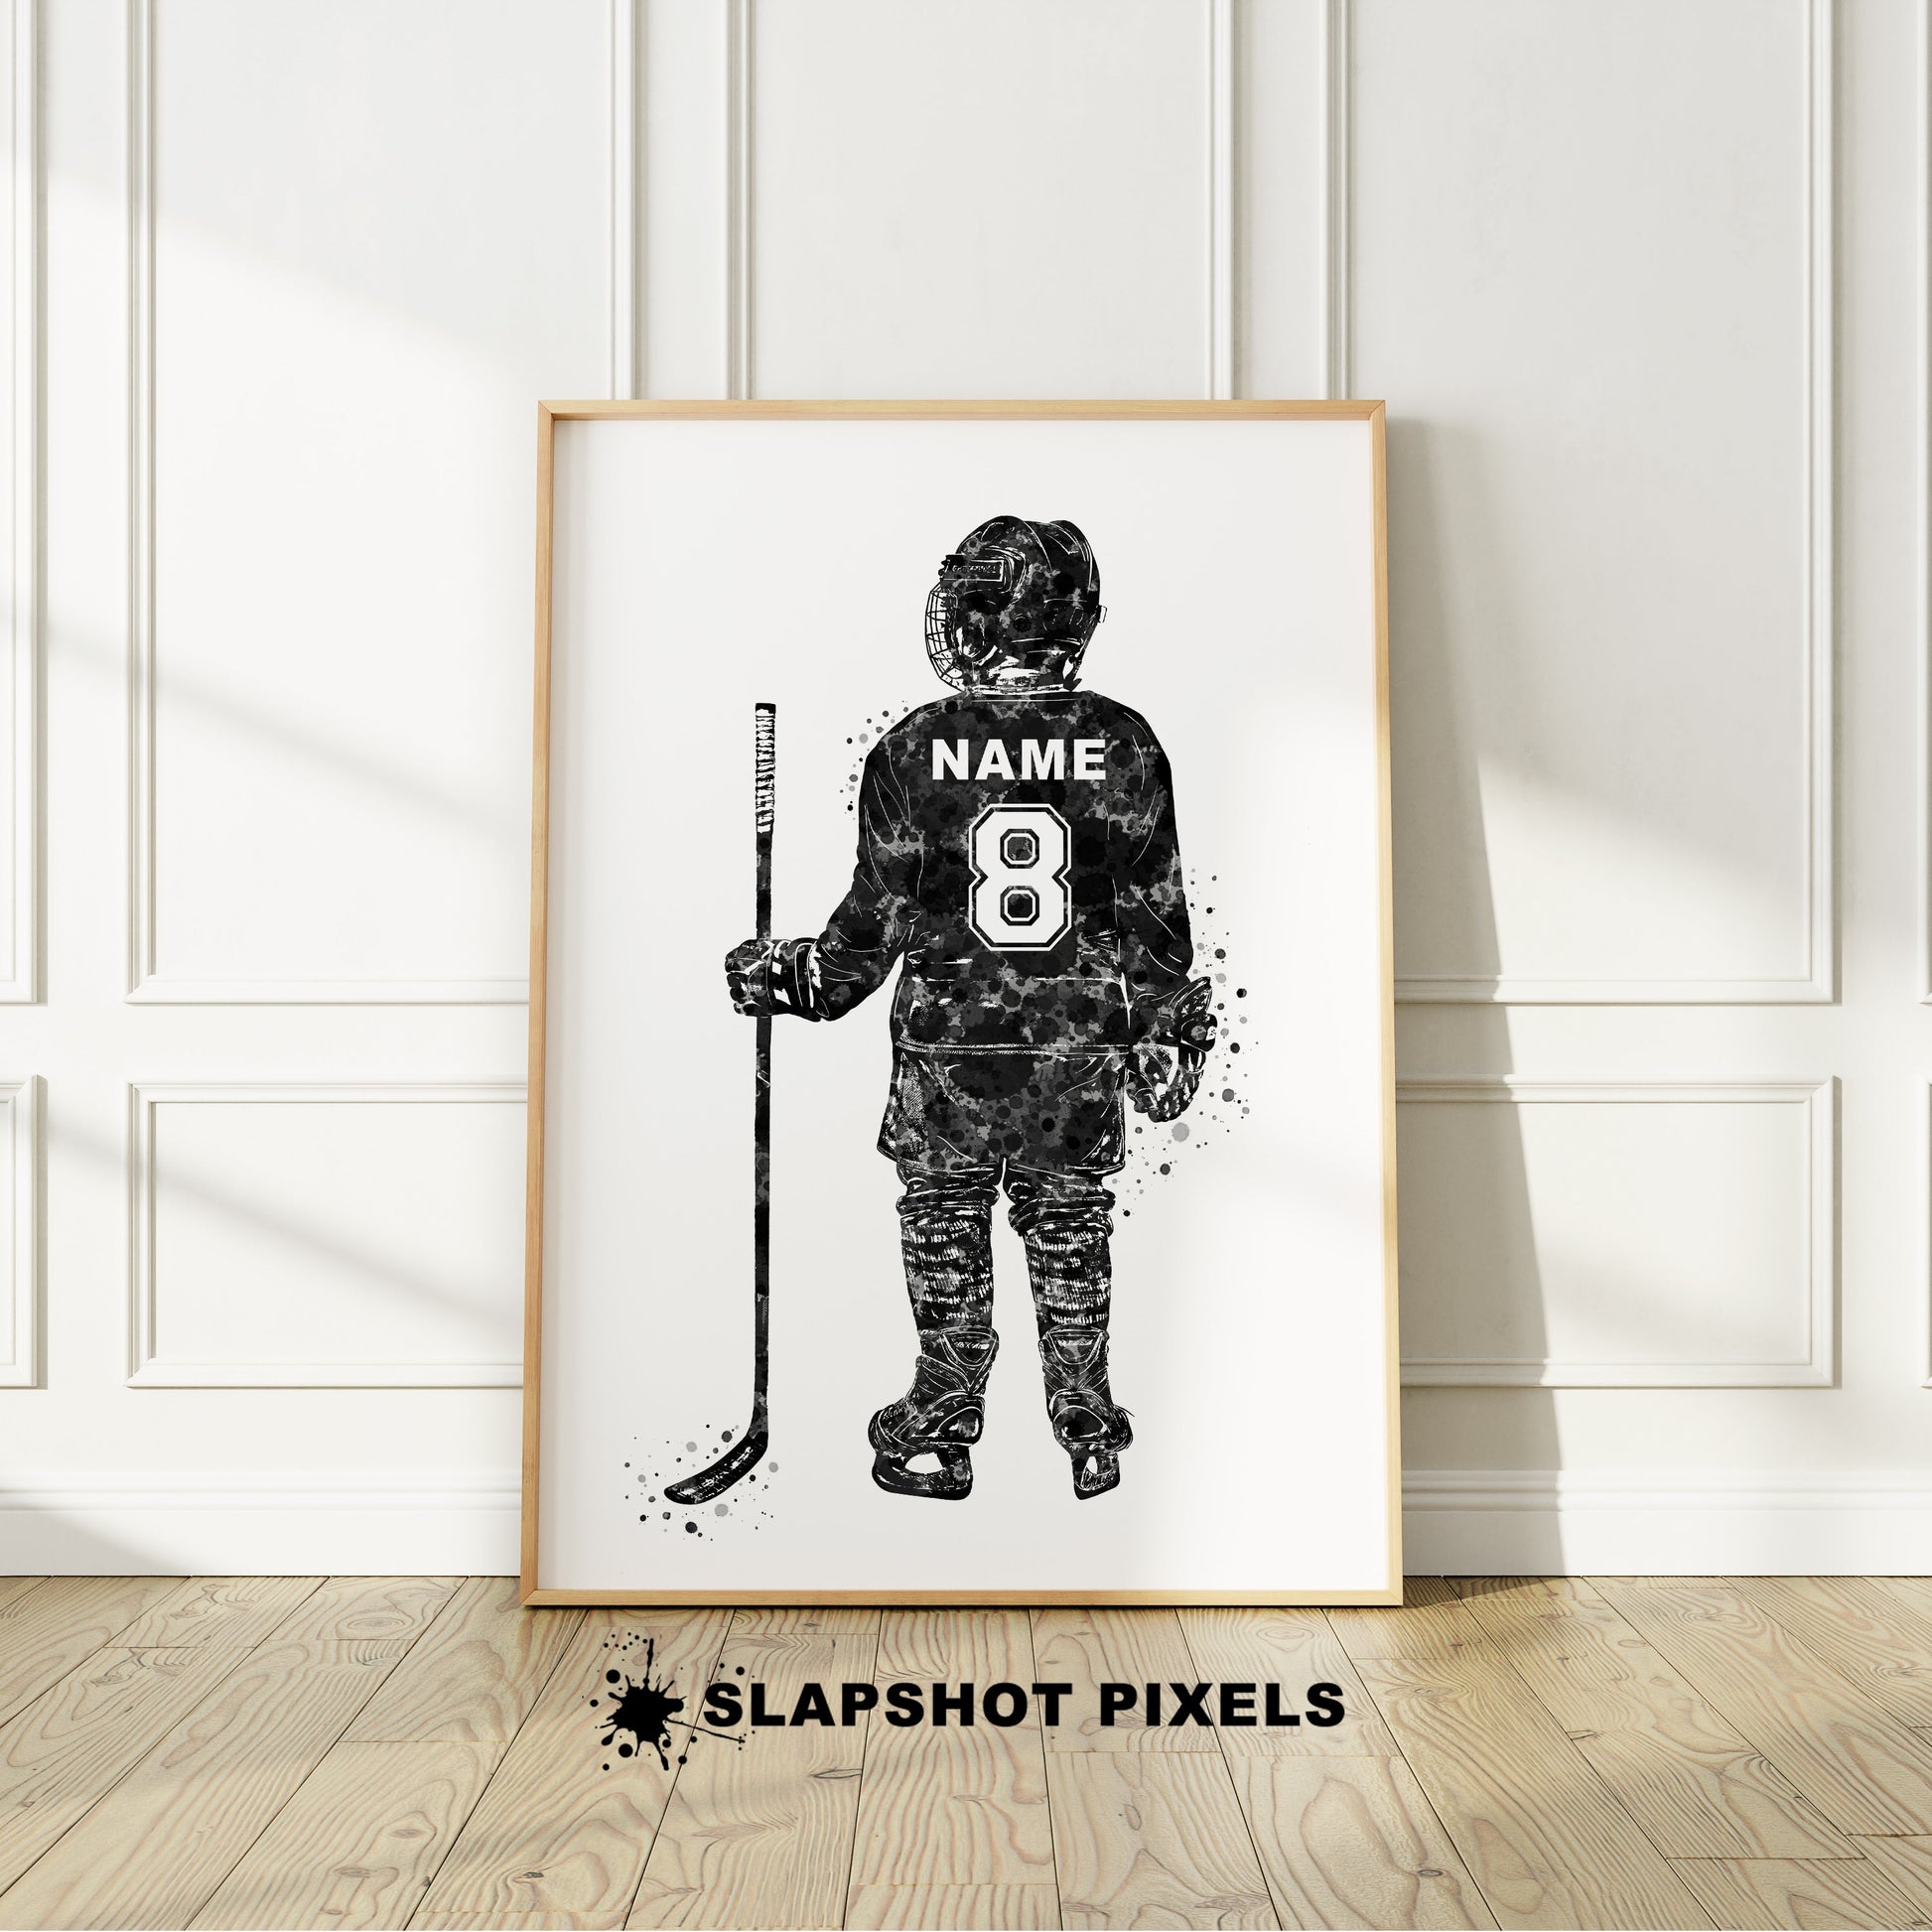 Personalized hockey poster showing back of little boy hockey player with custom name and number on the hockey jersey. Designed in watercolor splatters. Perfect hockey gifts for boys, hockey team gifts, hockey coach gift, hockey wall art décor in a hockey bedroom and birthday gifts for hockey players.